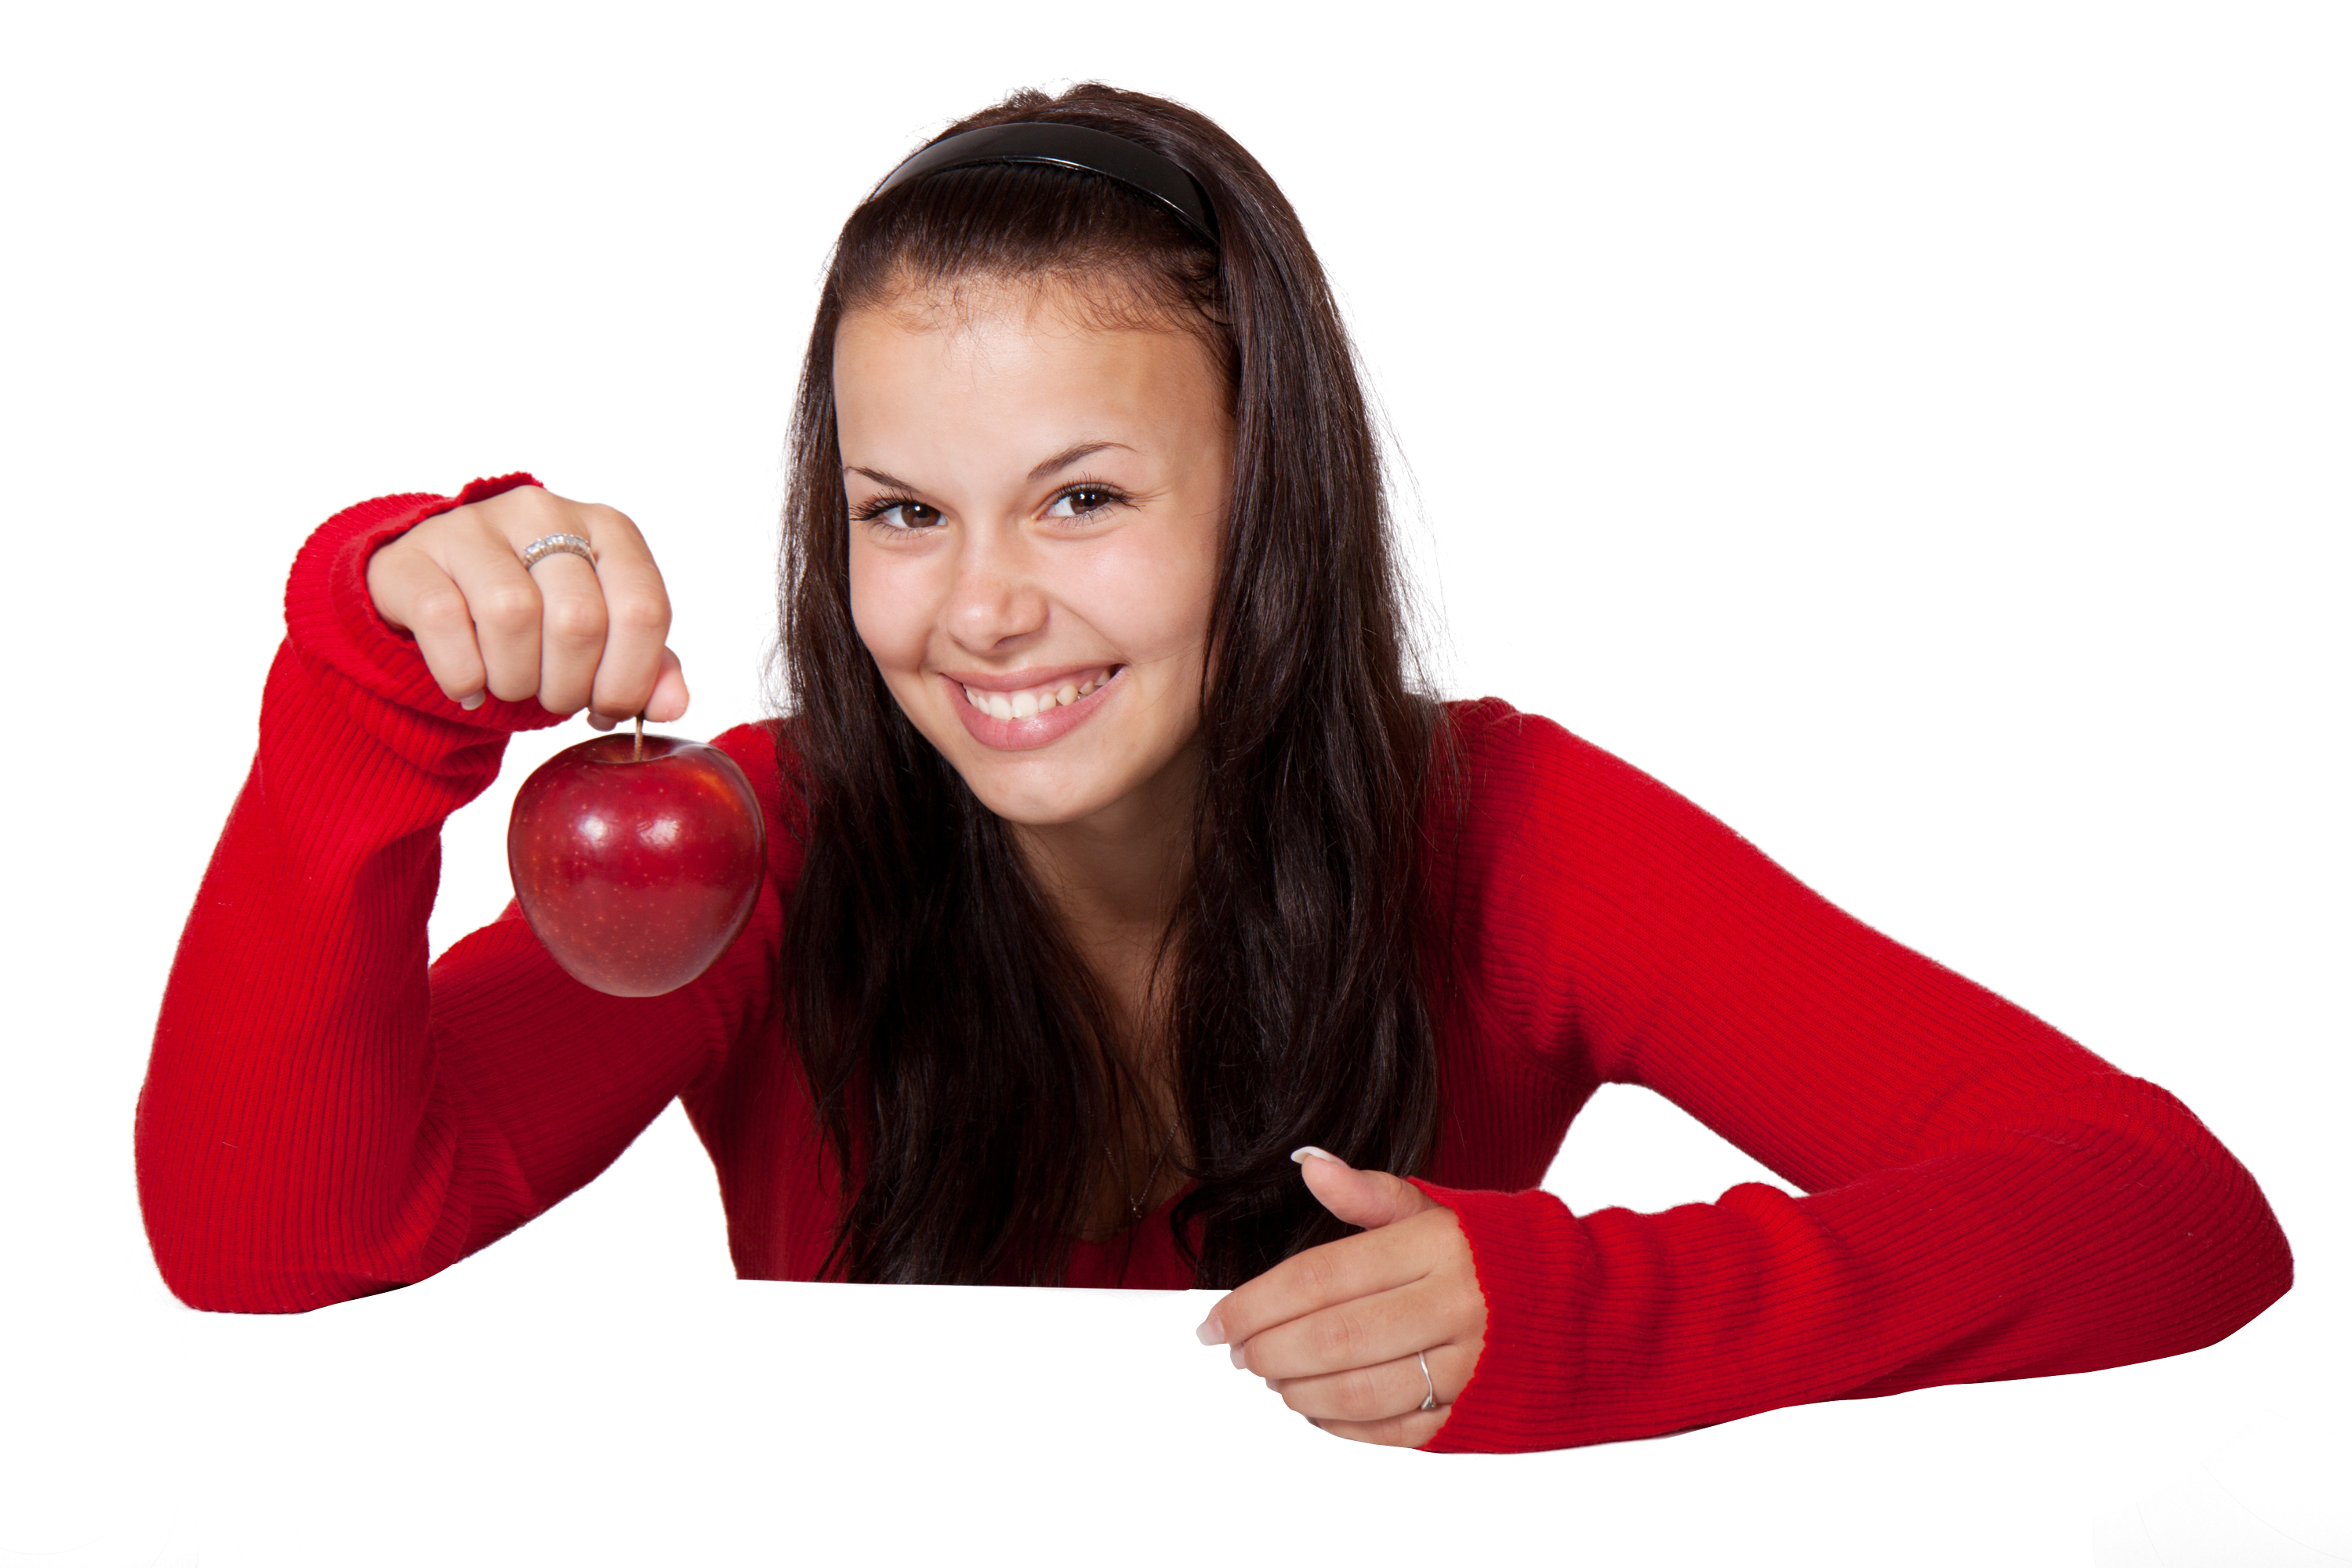 Girl Holding Apple PNG Image